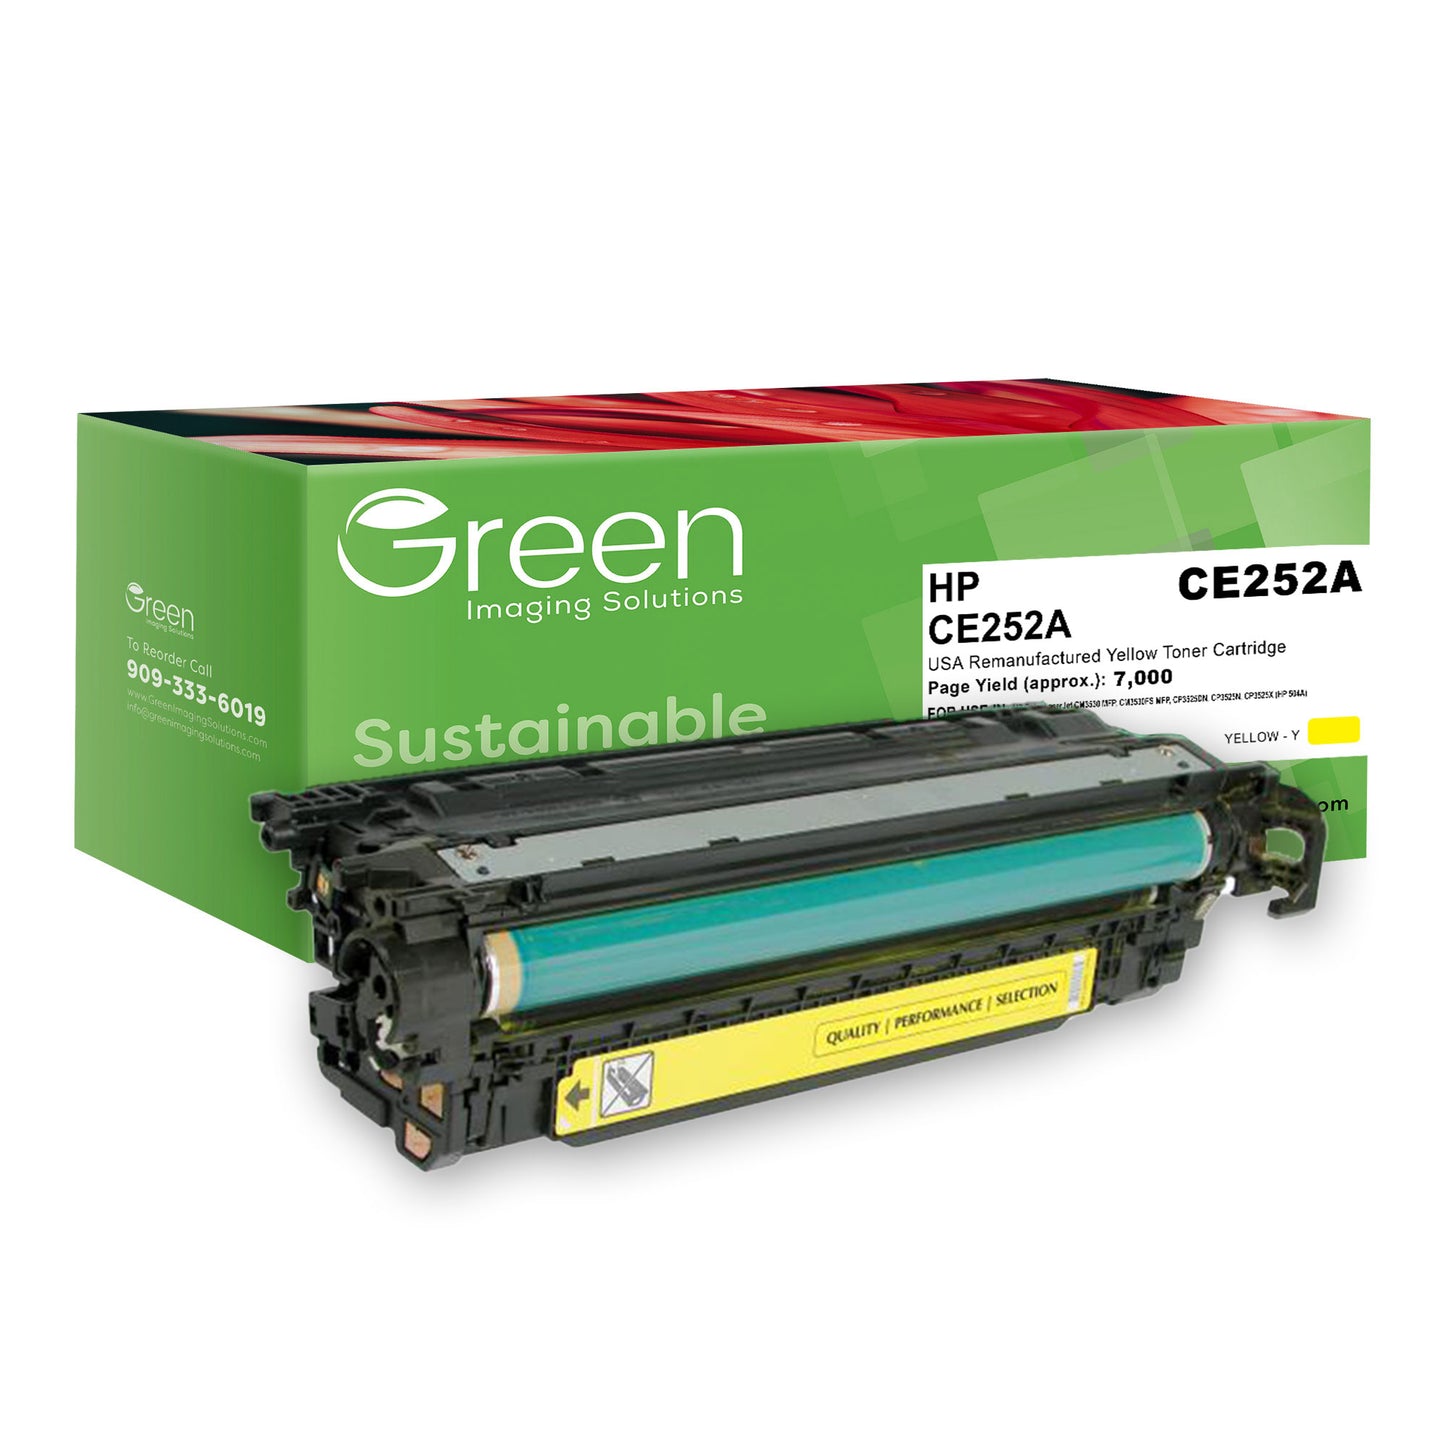 GIS USA Remanufactured Yellow Toner Cartridge for HP CE252A (HP 504A)